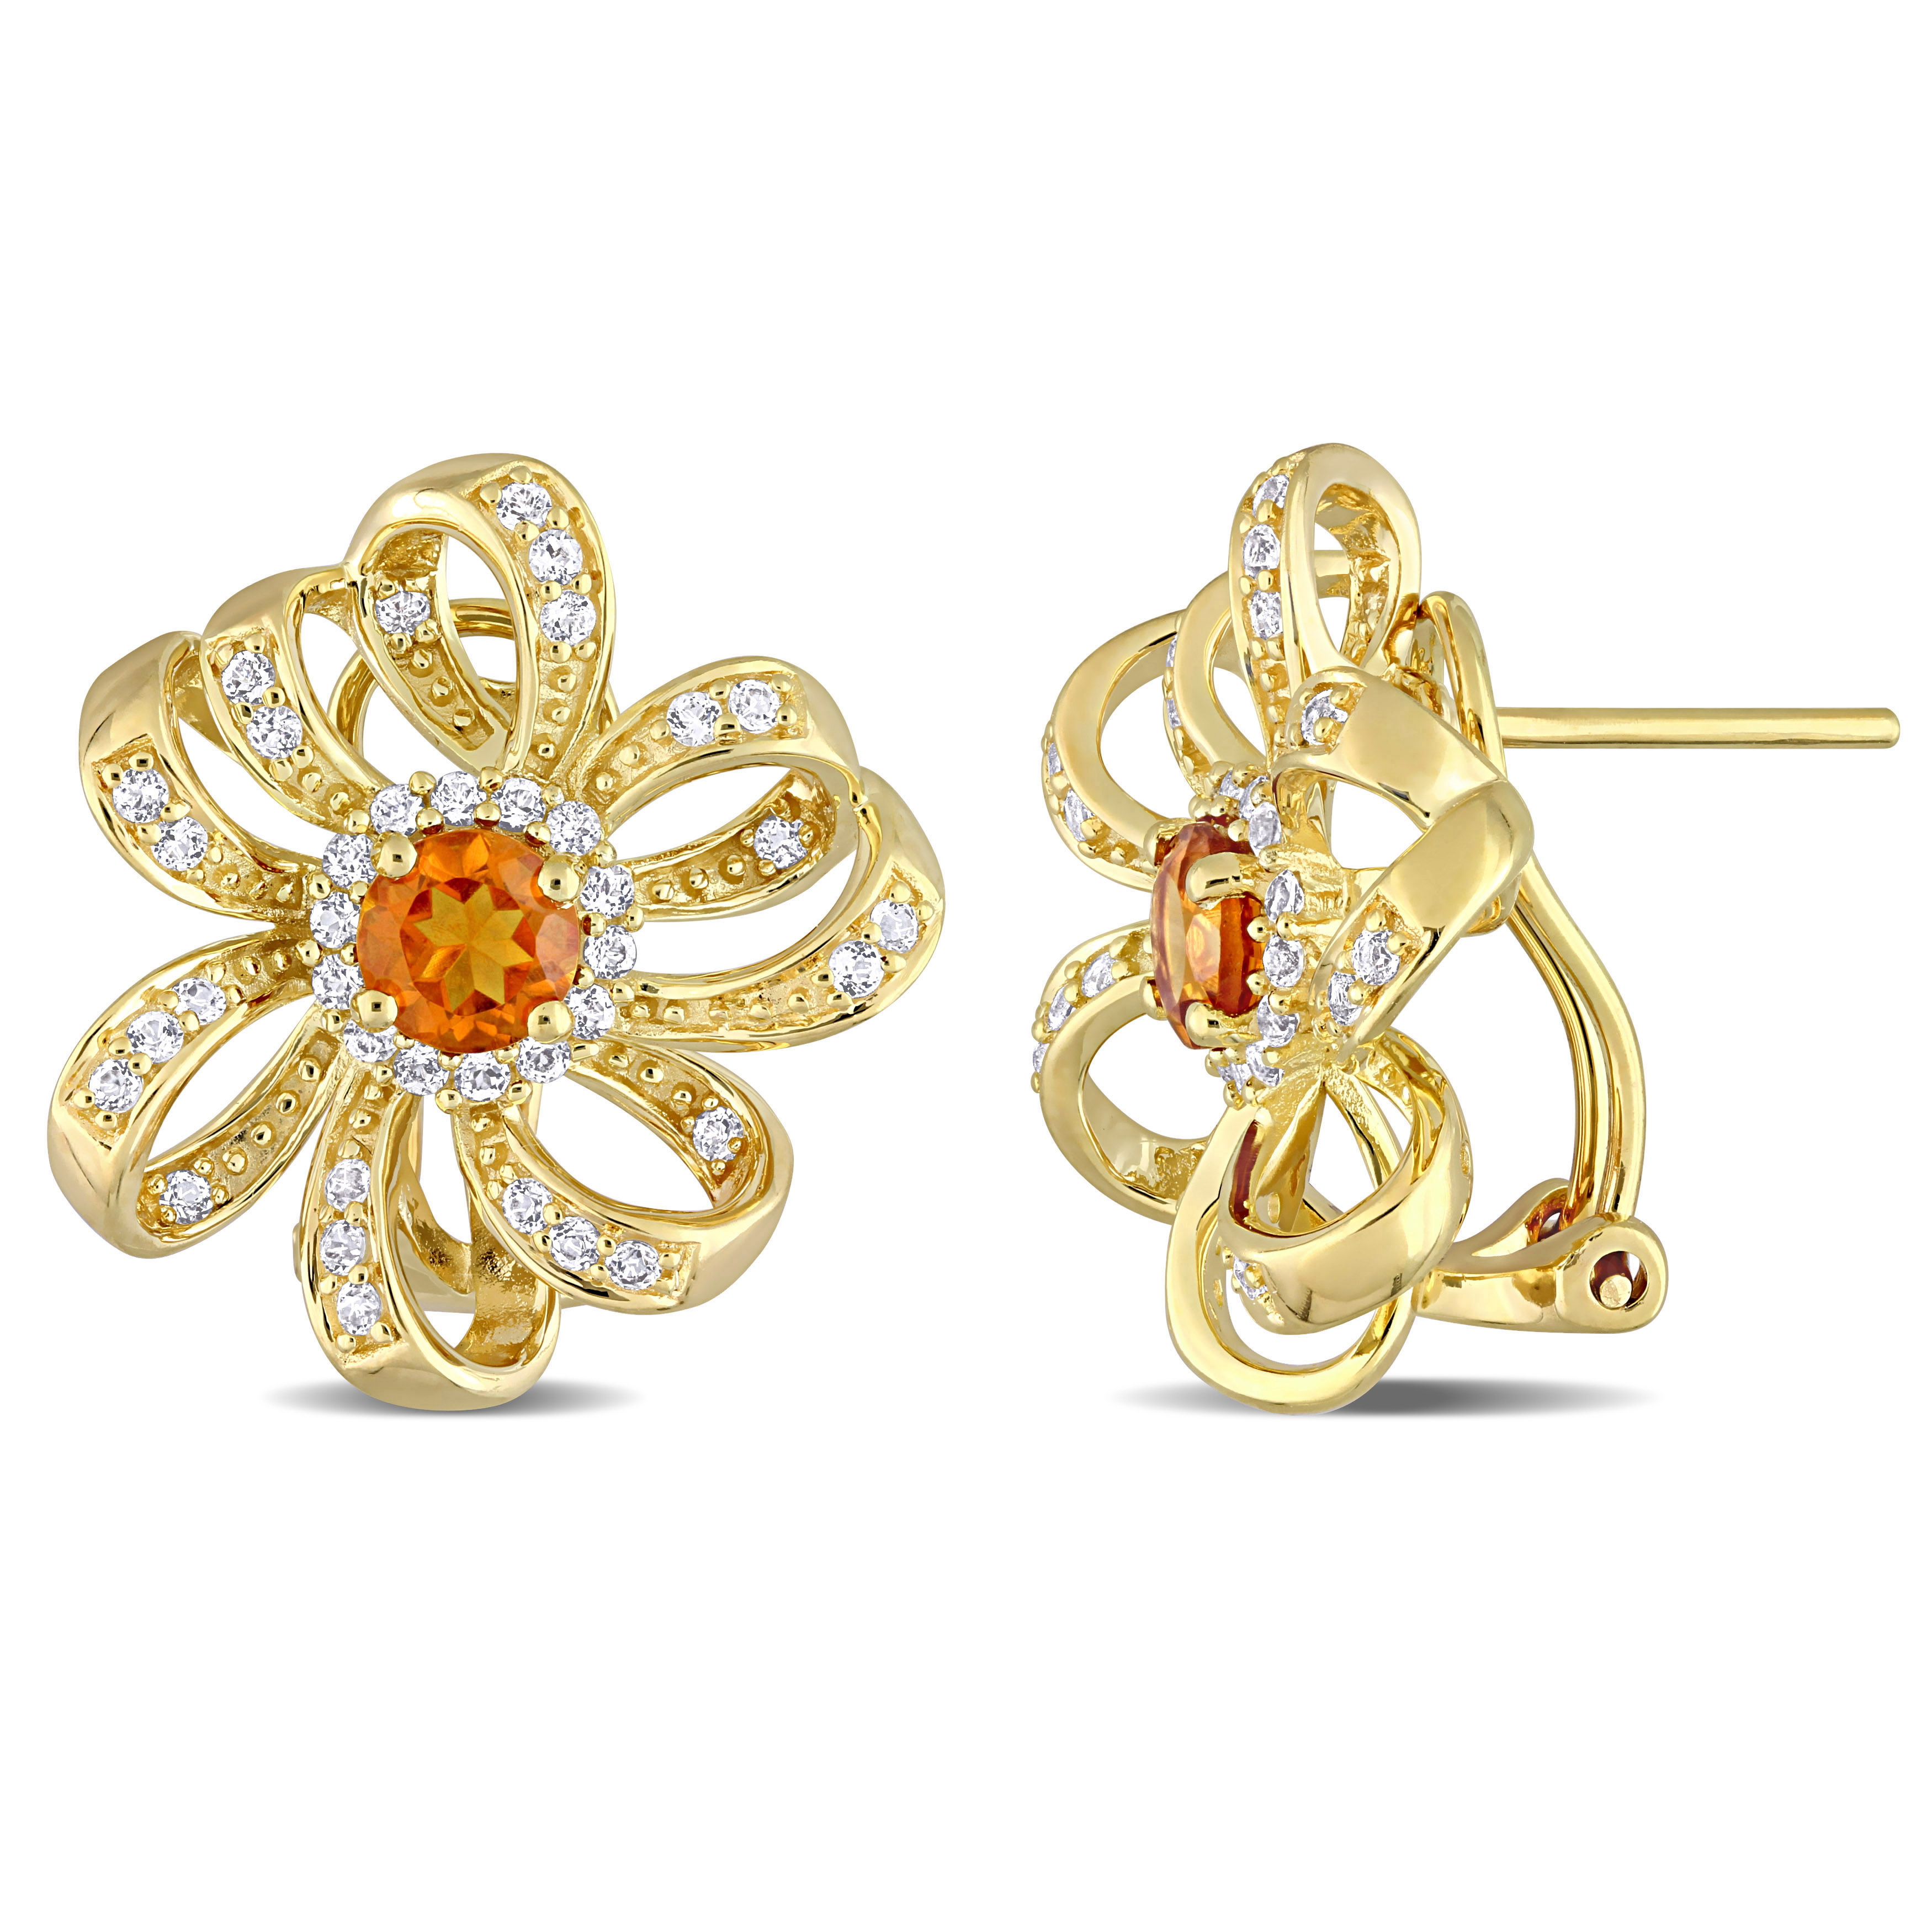 1 3/5 CT TGW Madeira Citrine and White Topaz Flower Omega Clip Earrings in 18k Yellow Gold Plated Sterling Silver